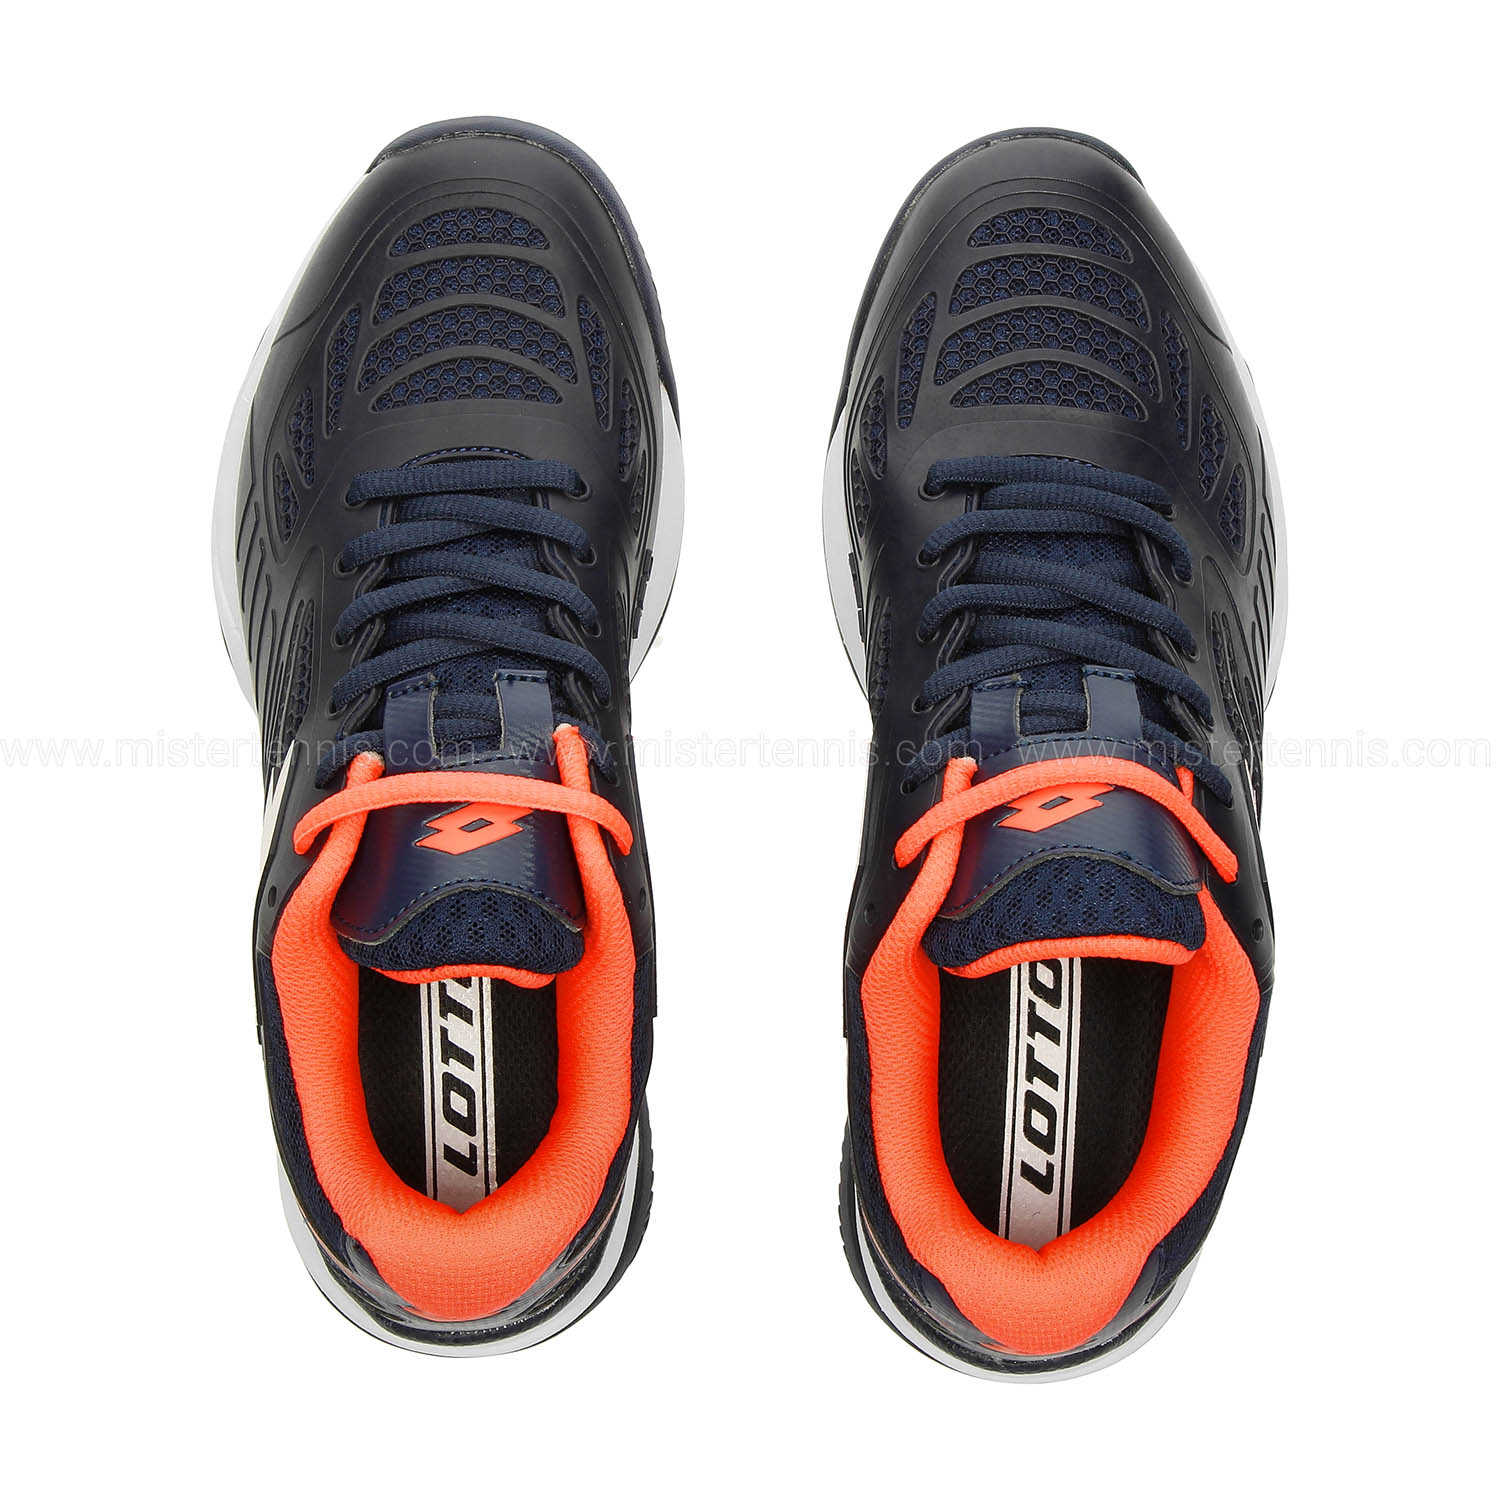 Lotto Superrapida 200 PRT - Navy Blue/All White/Coral Fluo